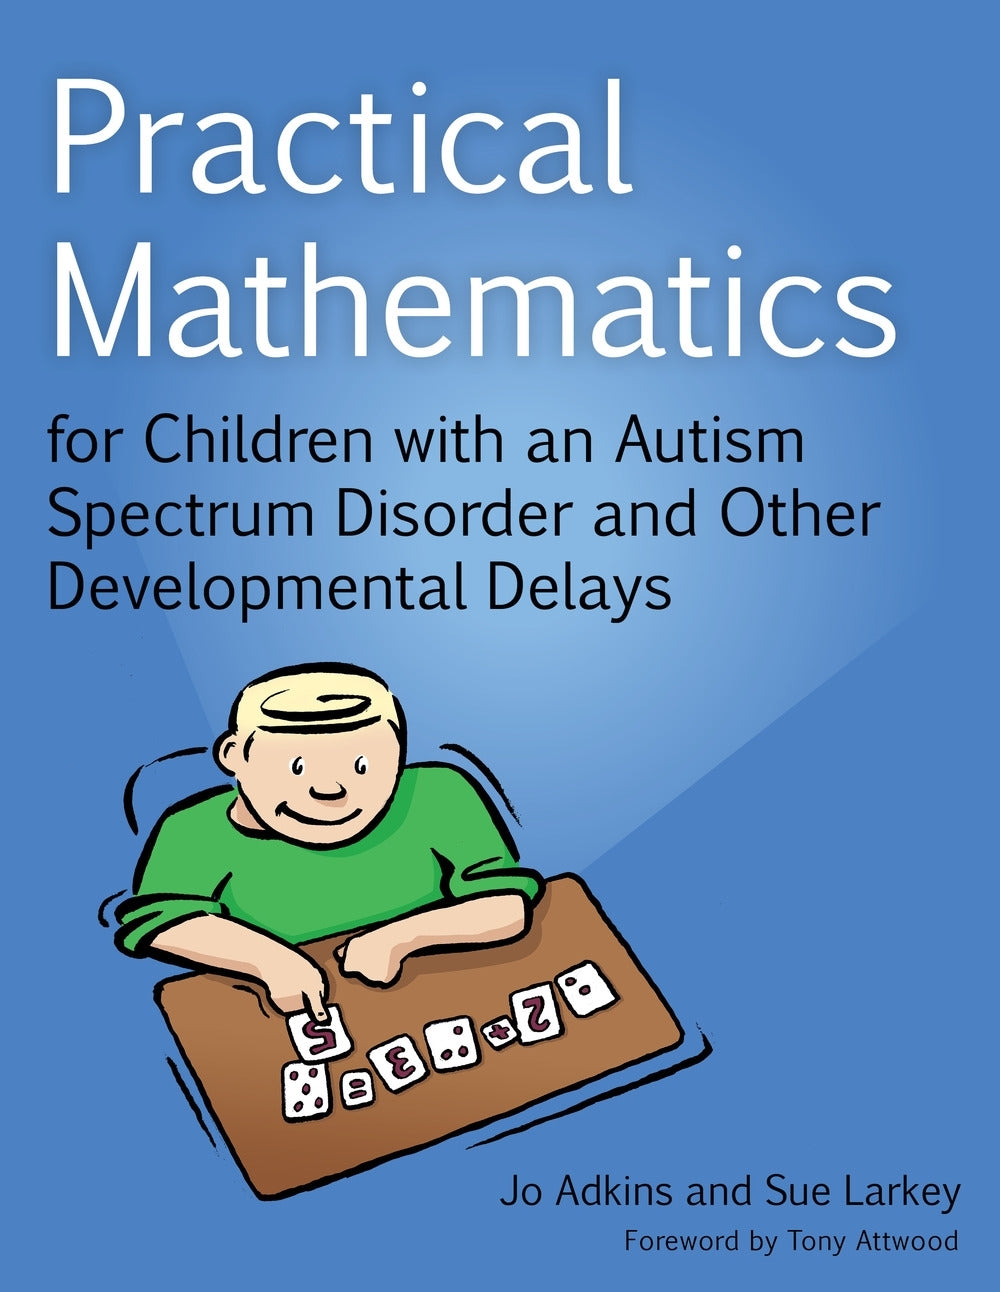 Practical Mathematics for Children with an Autism Spectrum Disorder and Other Developmental Delays by Dr Anthony Attwood, Sue Larkey, Jo Adkins